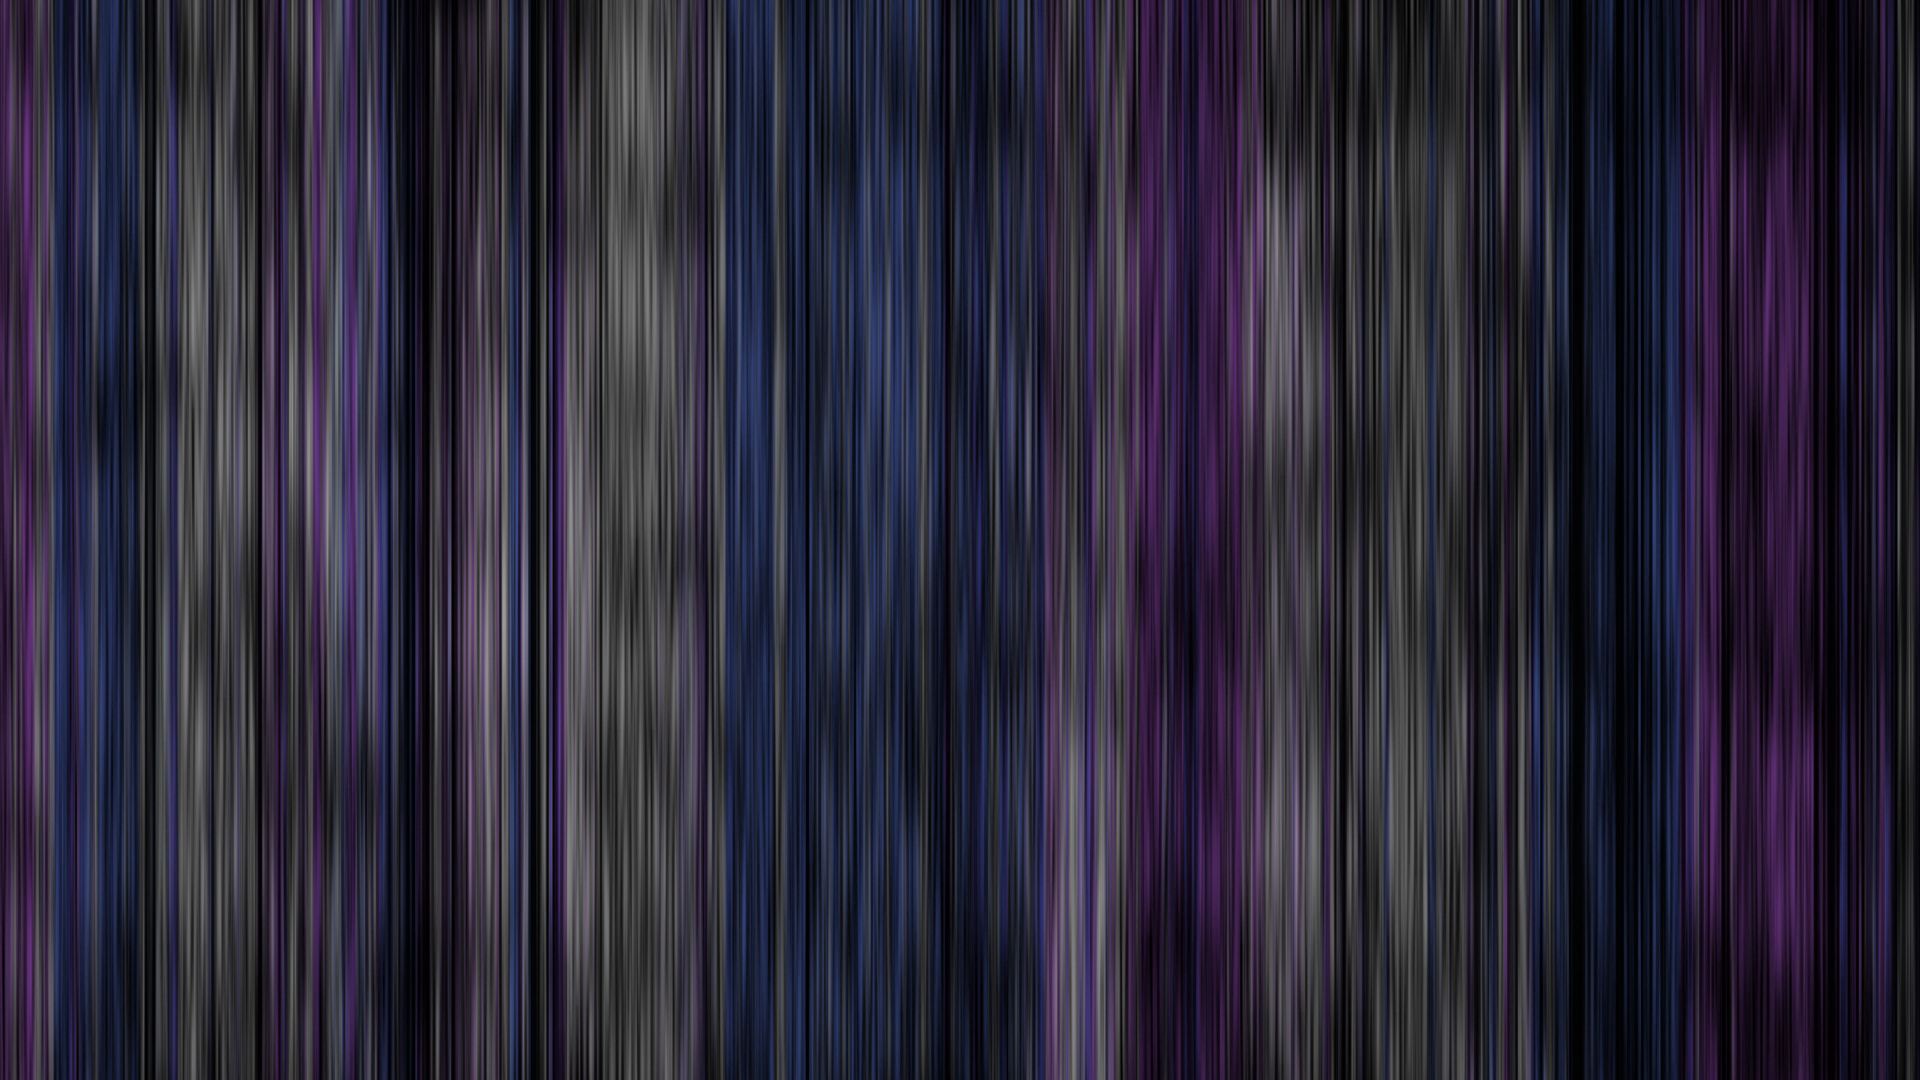 Phone Background Full HD stripes, abstract, purple, grey